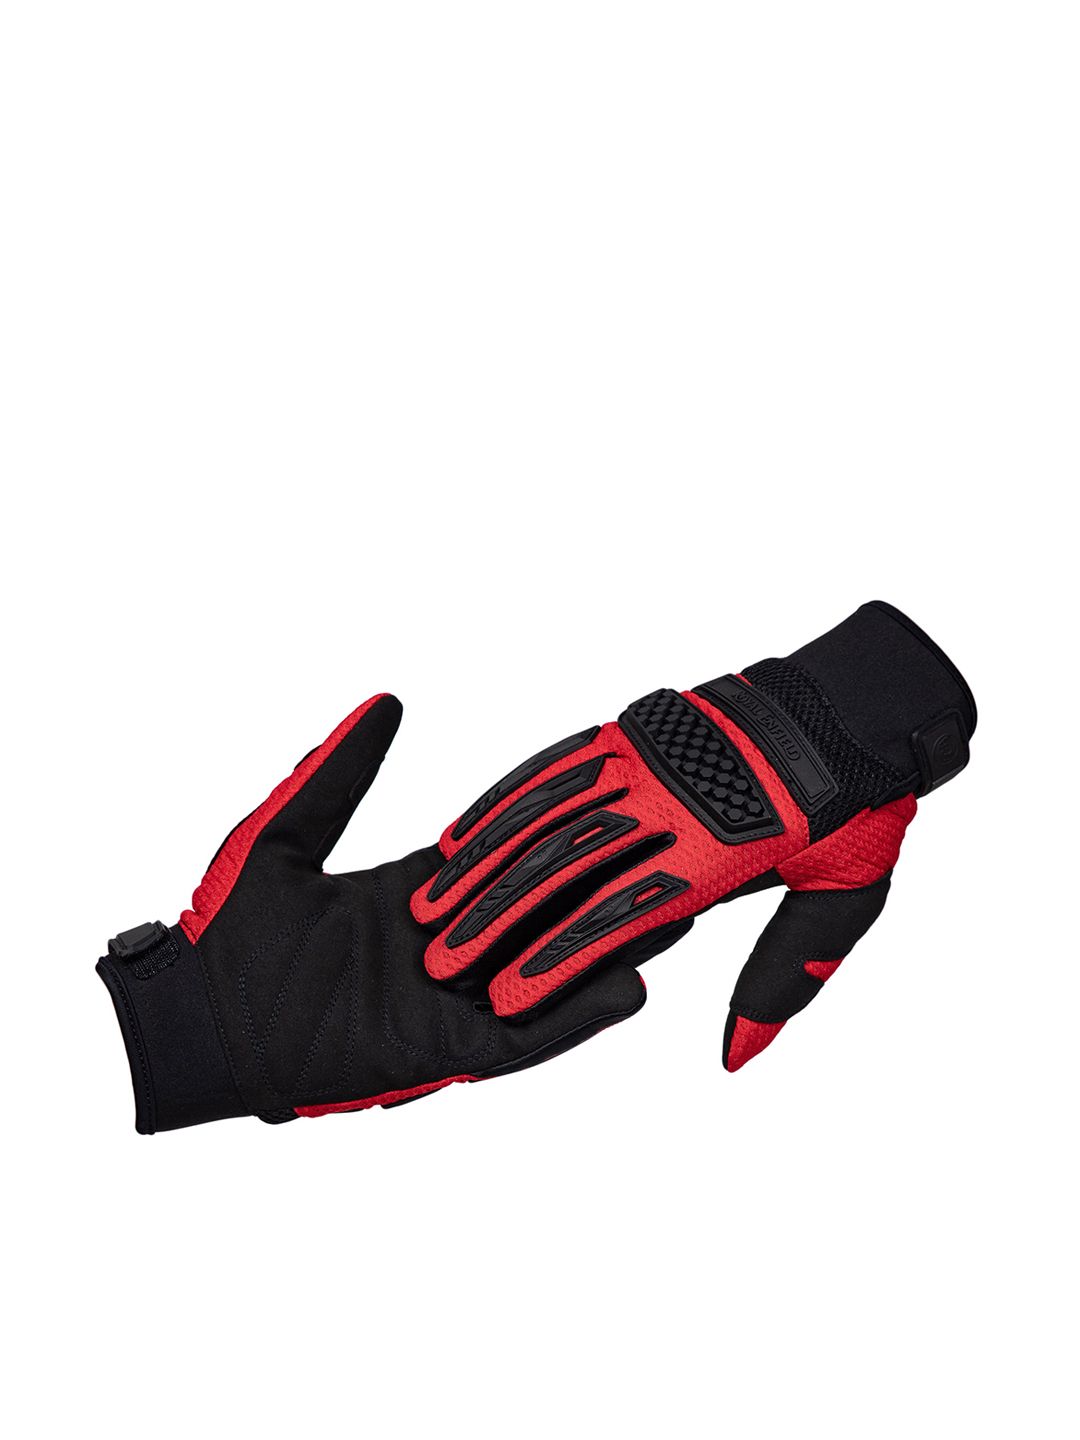 Royal Enfield Unisex Red & Black Colourblocked Leather Gloves Price in India